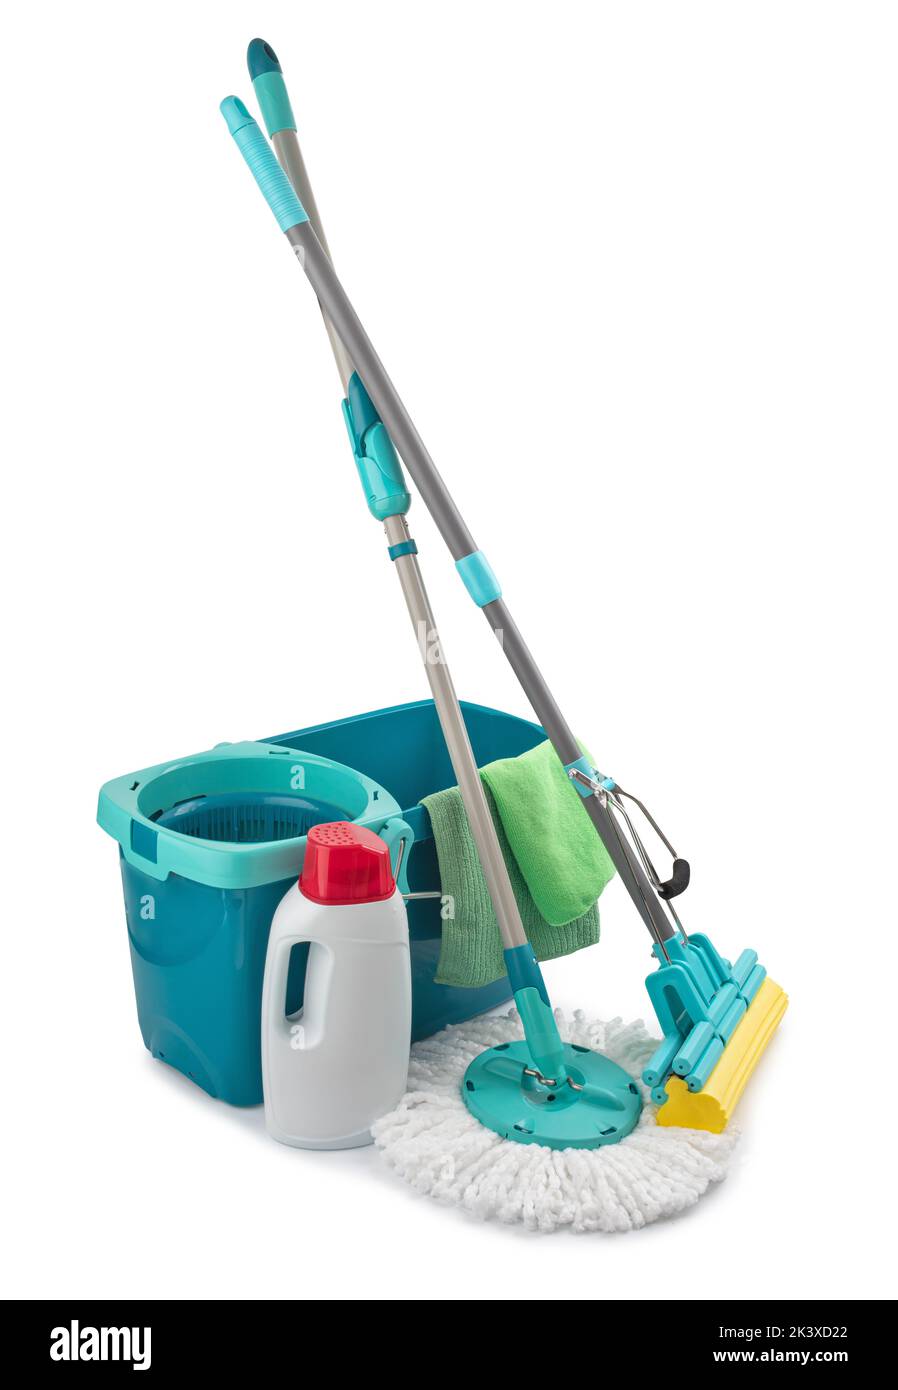 https://c8.alamy.com/comp/2K3XD22/plastic-bucket-with-cleaning-supplies-and-bottle-isolated-on-white-background-2K3XD22.jpg